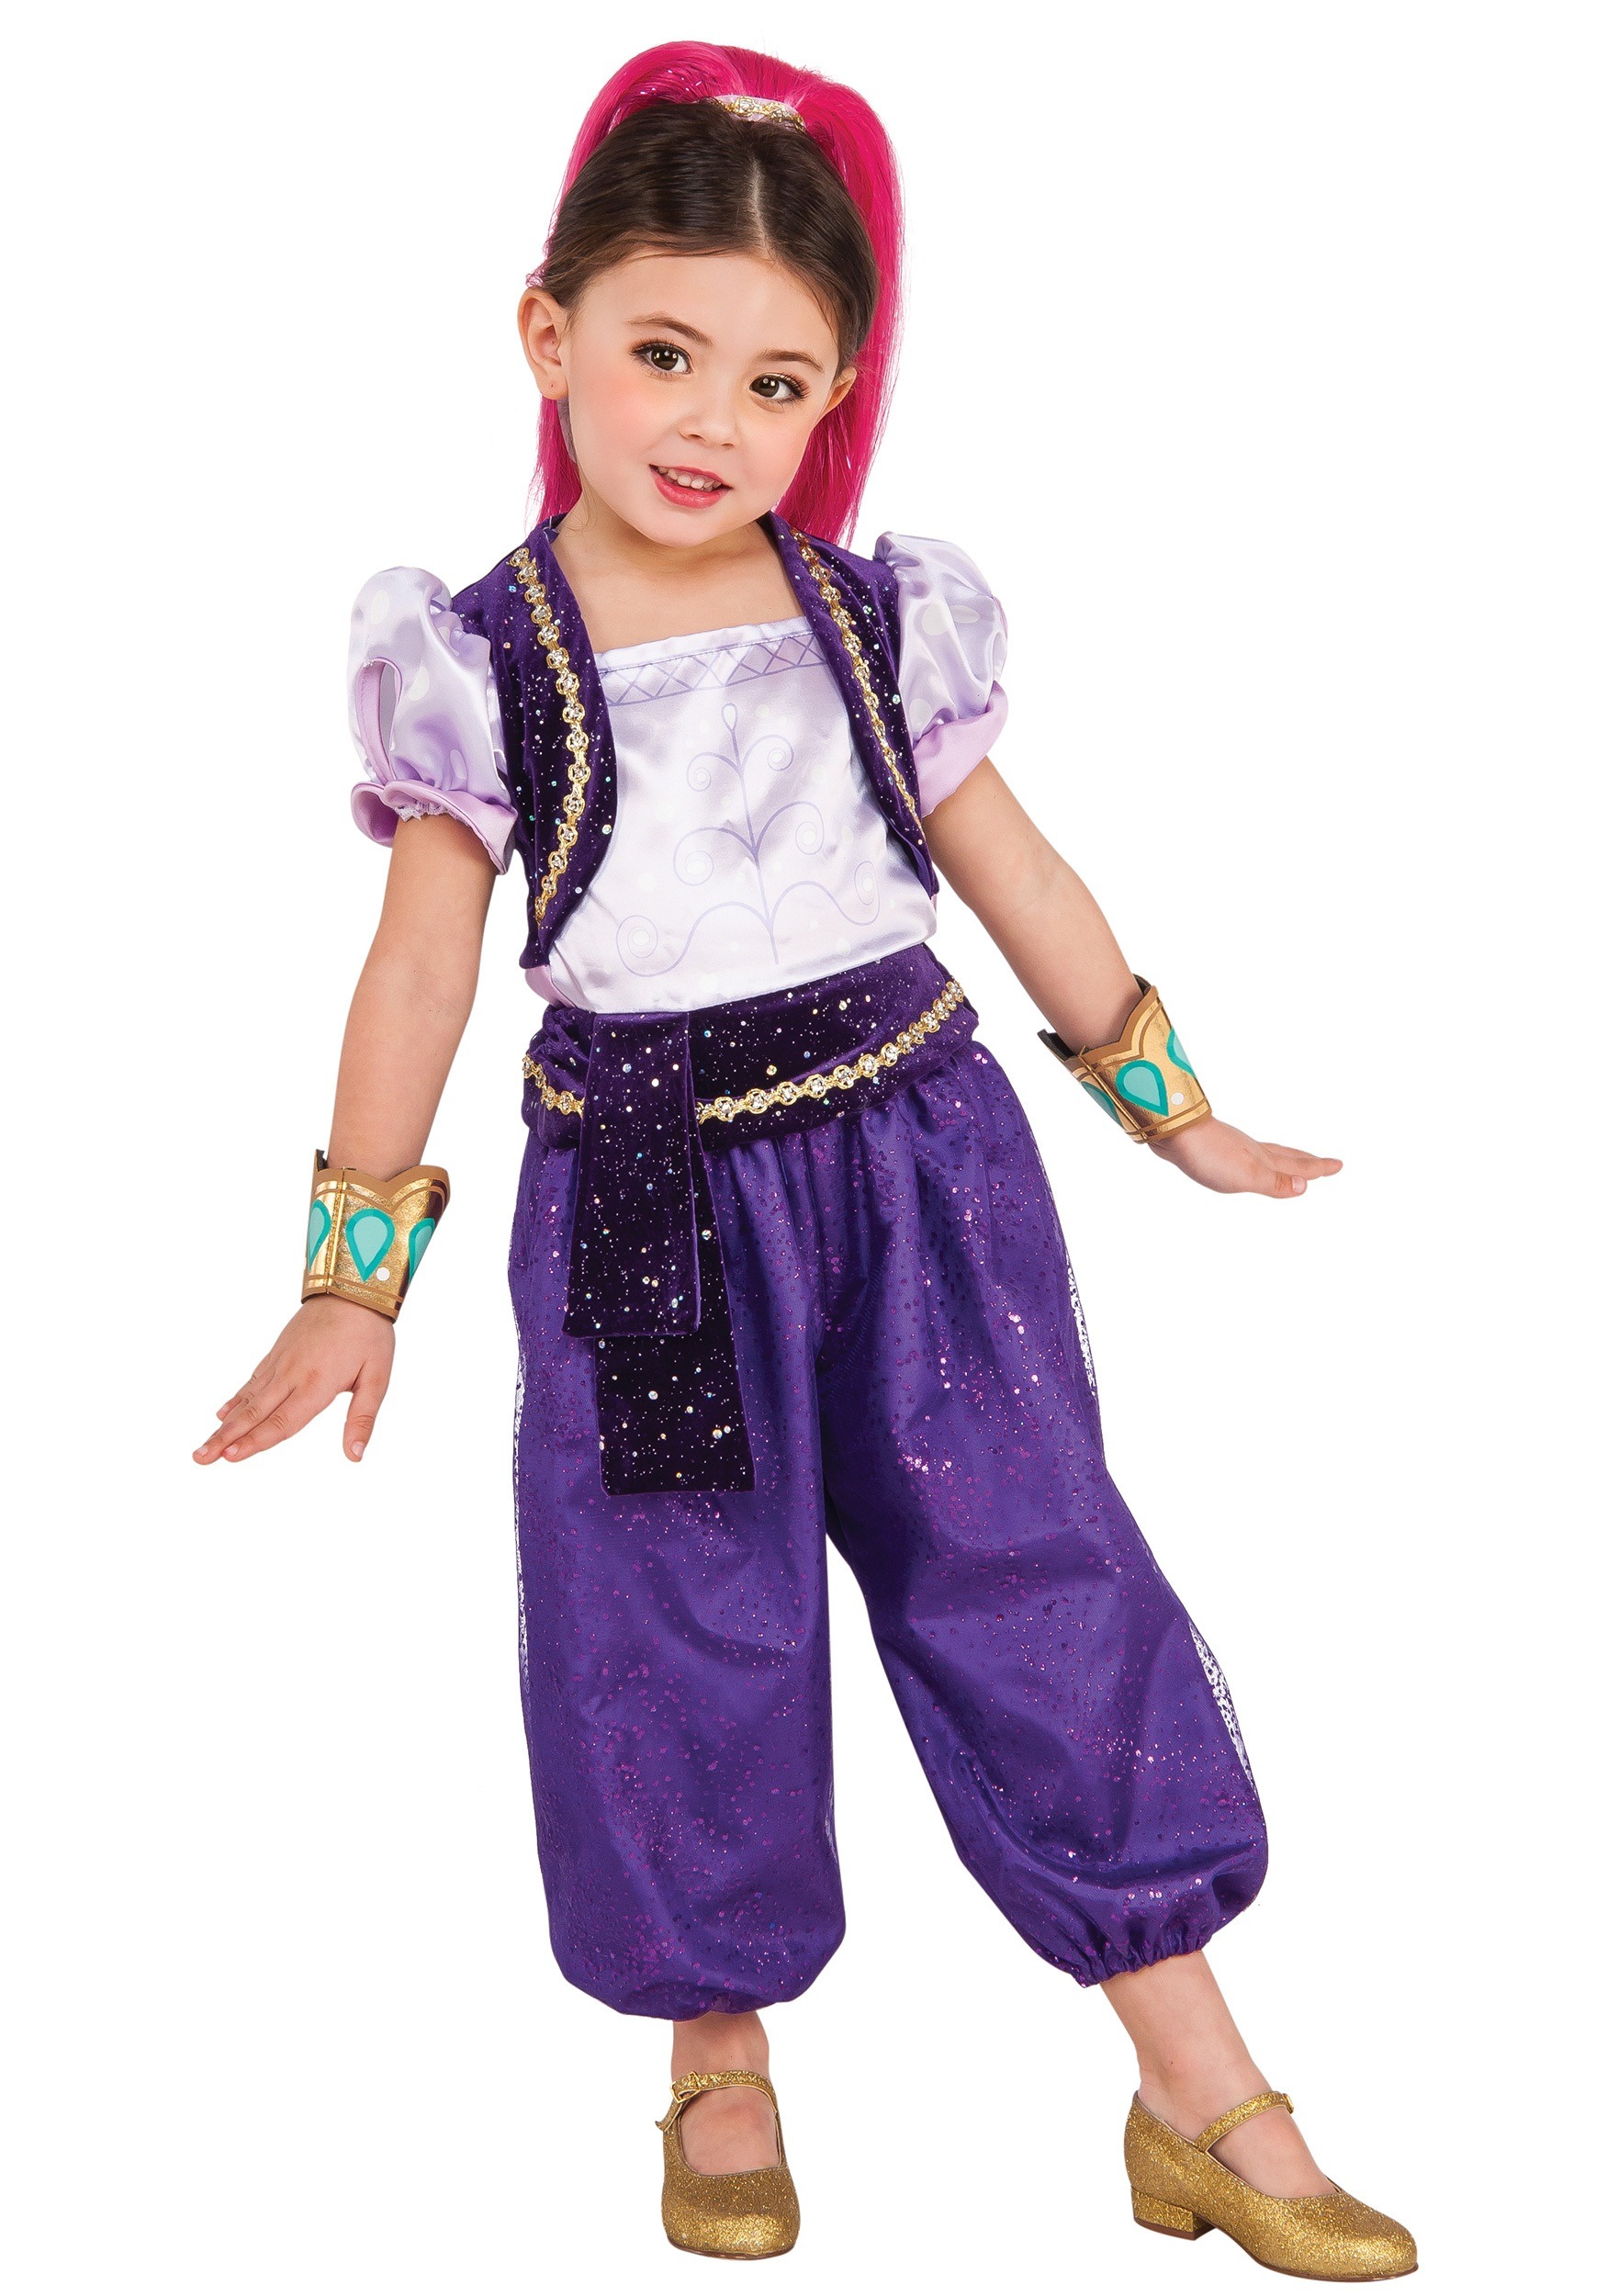 Photos - Fancy Dress Rubies Costume Co. Inc Girls Deluxe Shimmer Costume from Shimmer and Shine 